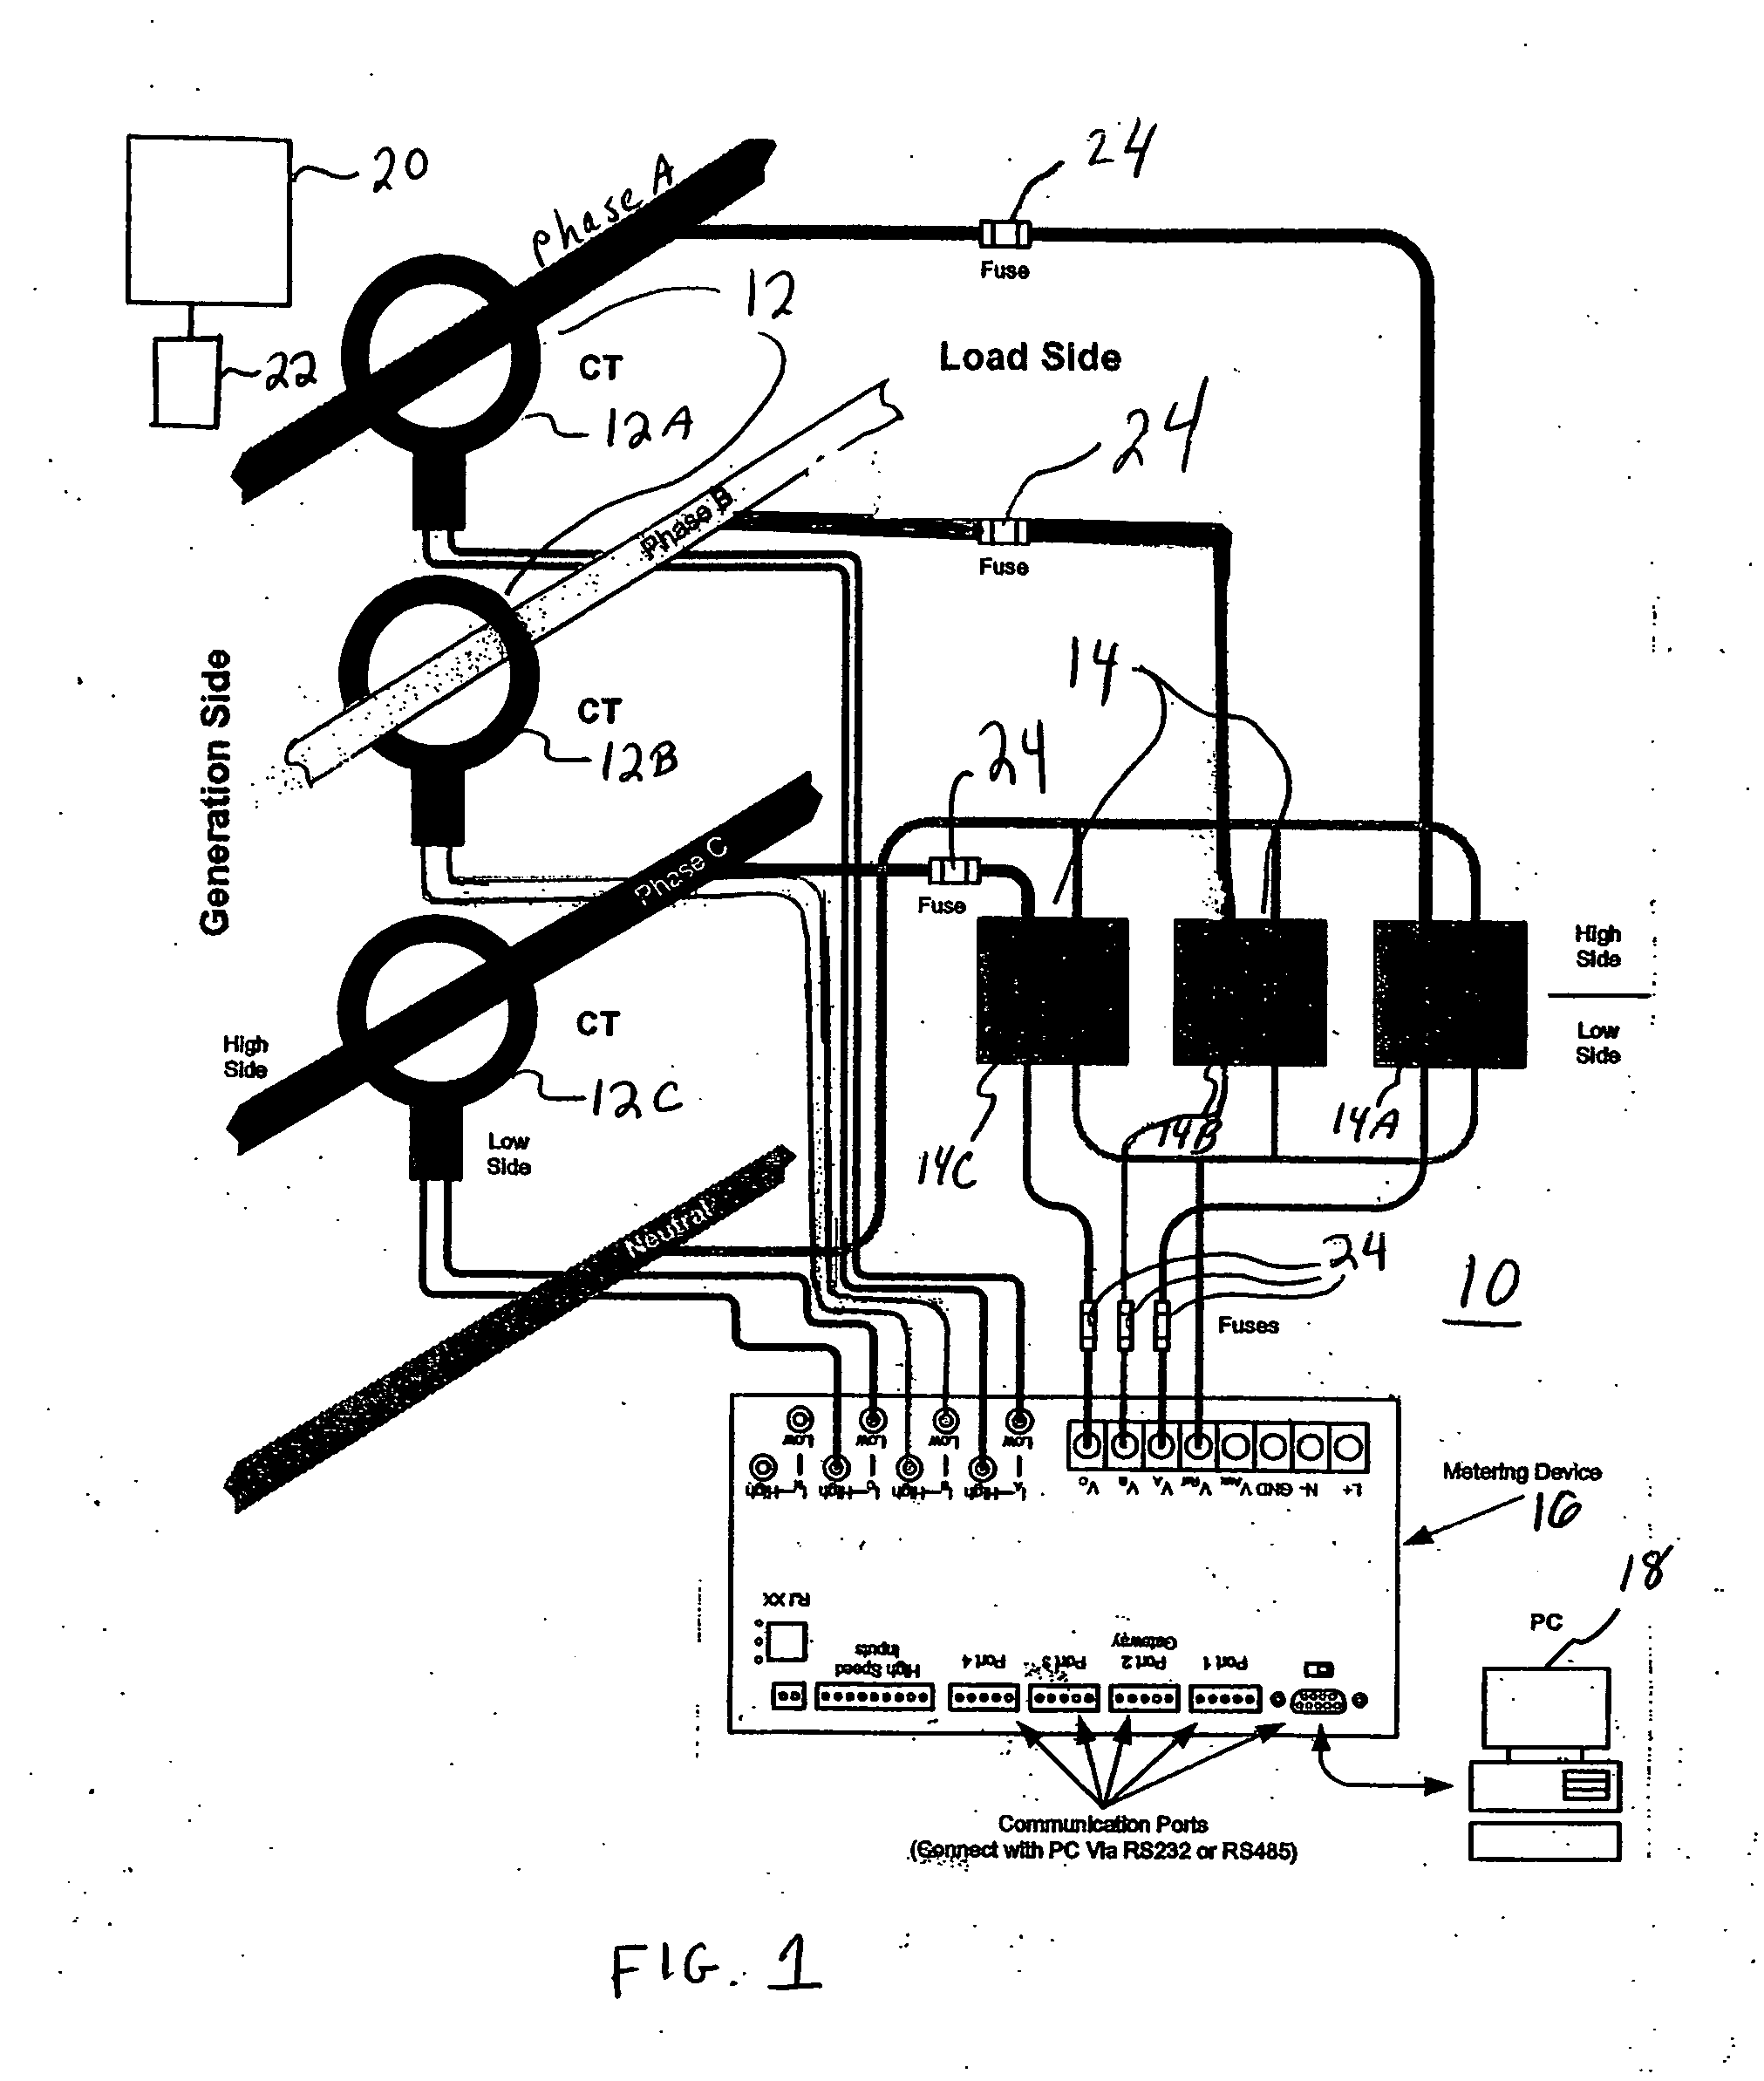 System and method for compensating for potential and current transformers in energy meters